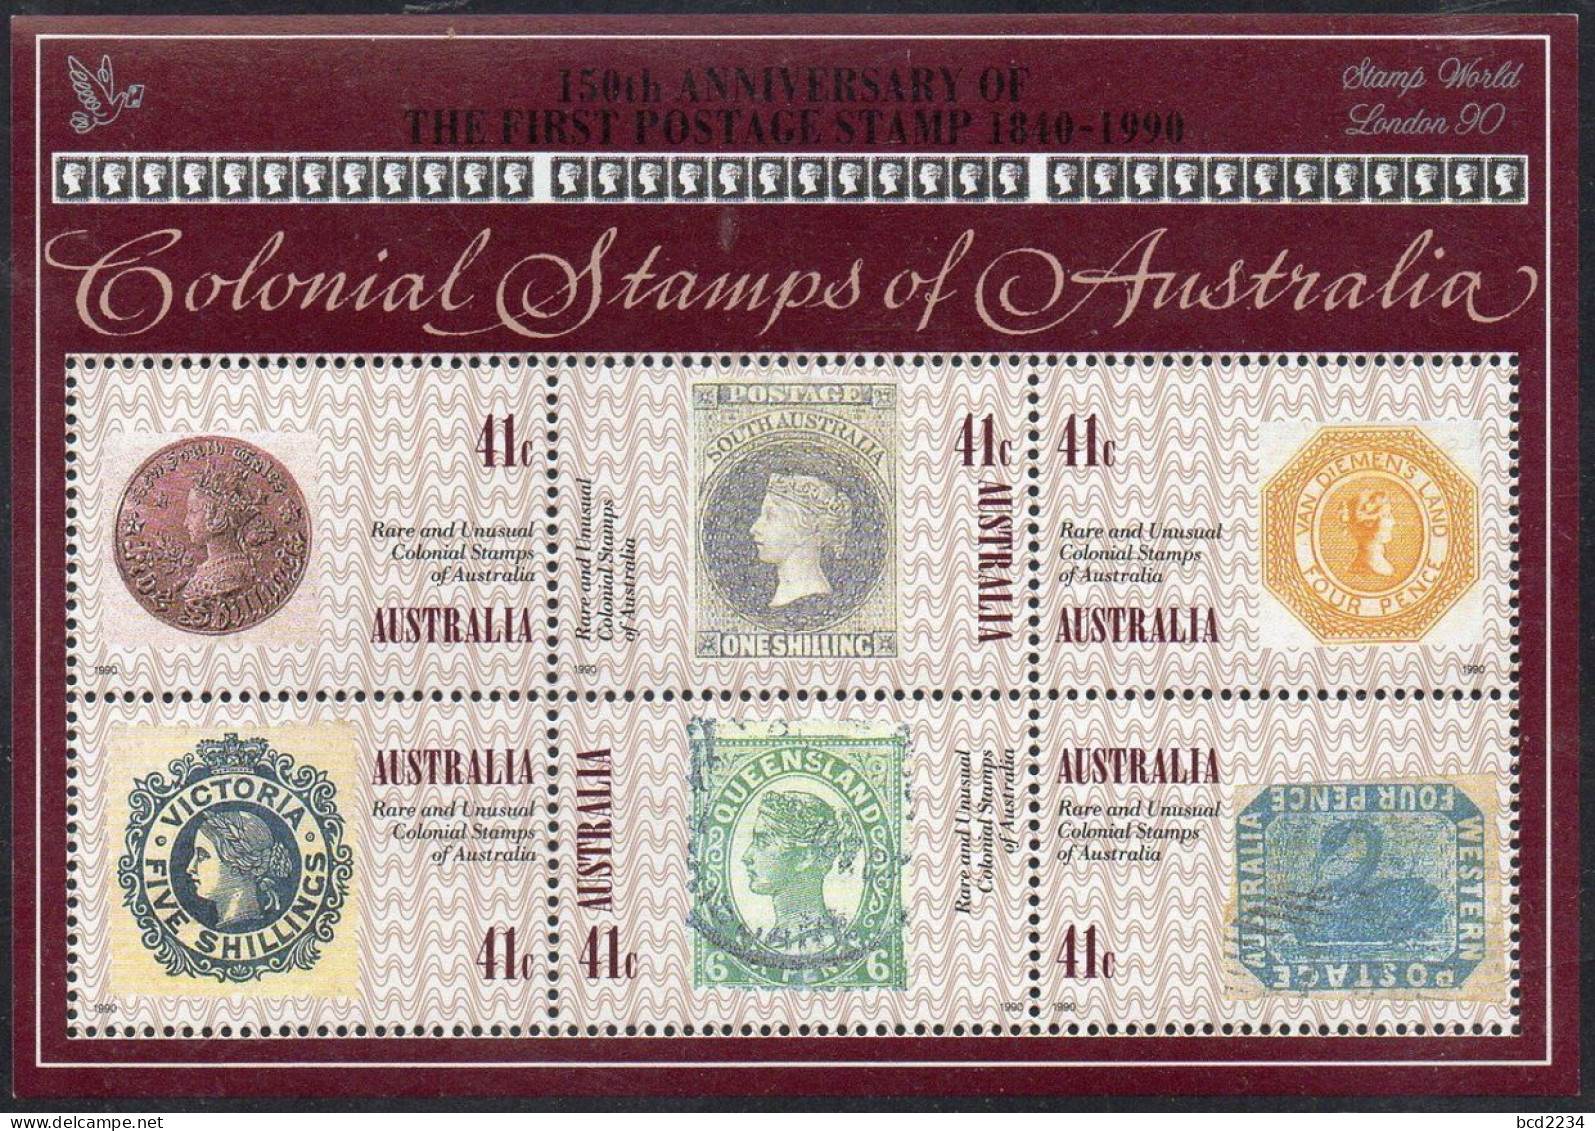 AUSTRALIA 1990 RARE & UNUSUAL COLONIAL STAMPS X10 + SILVER STAMP WORLD LONDON 90 OVERPRINT SG MS1253 Mi BL 10 MNH - Mint Stamps